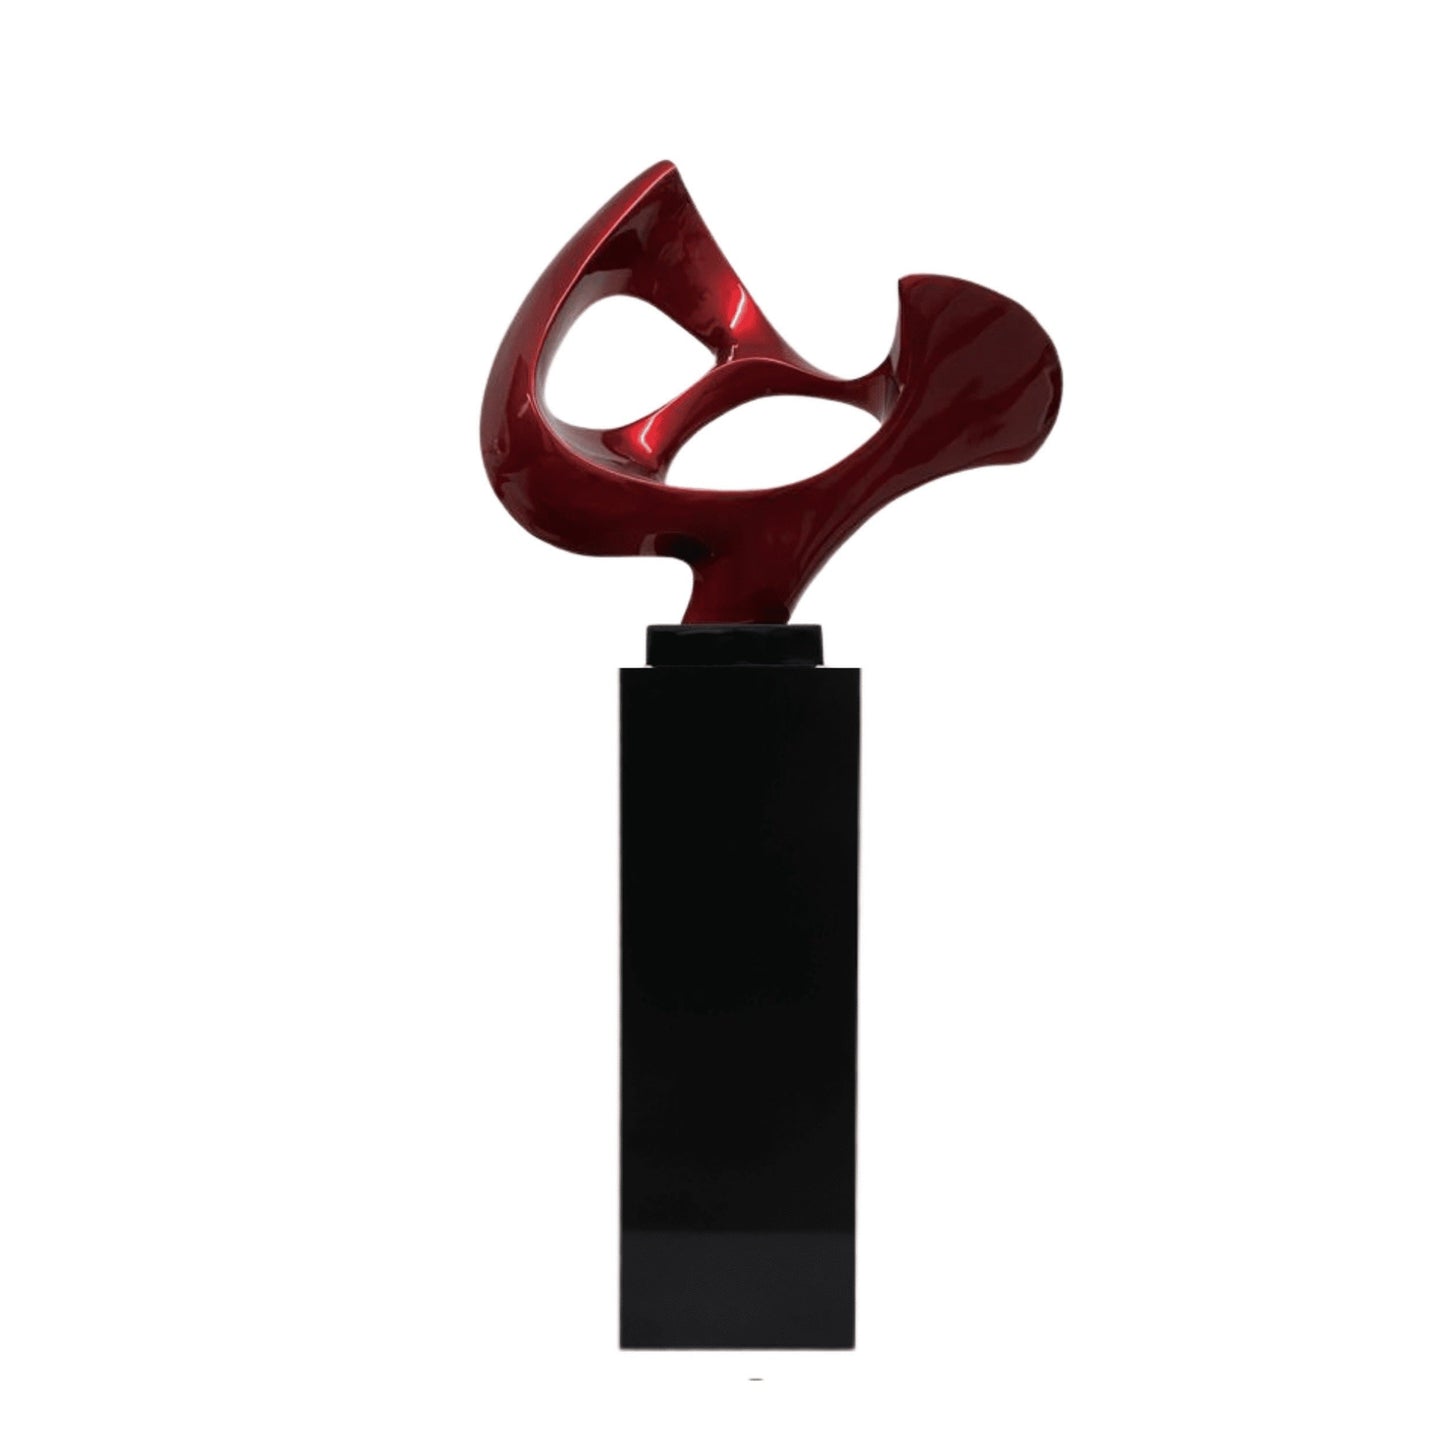 SHIVA 54" Metallic Red Abstract Mask Floor Sculpture With Black Stand